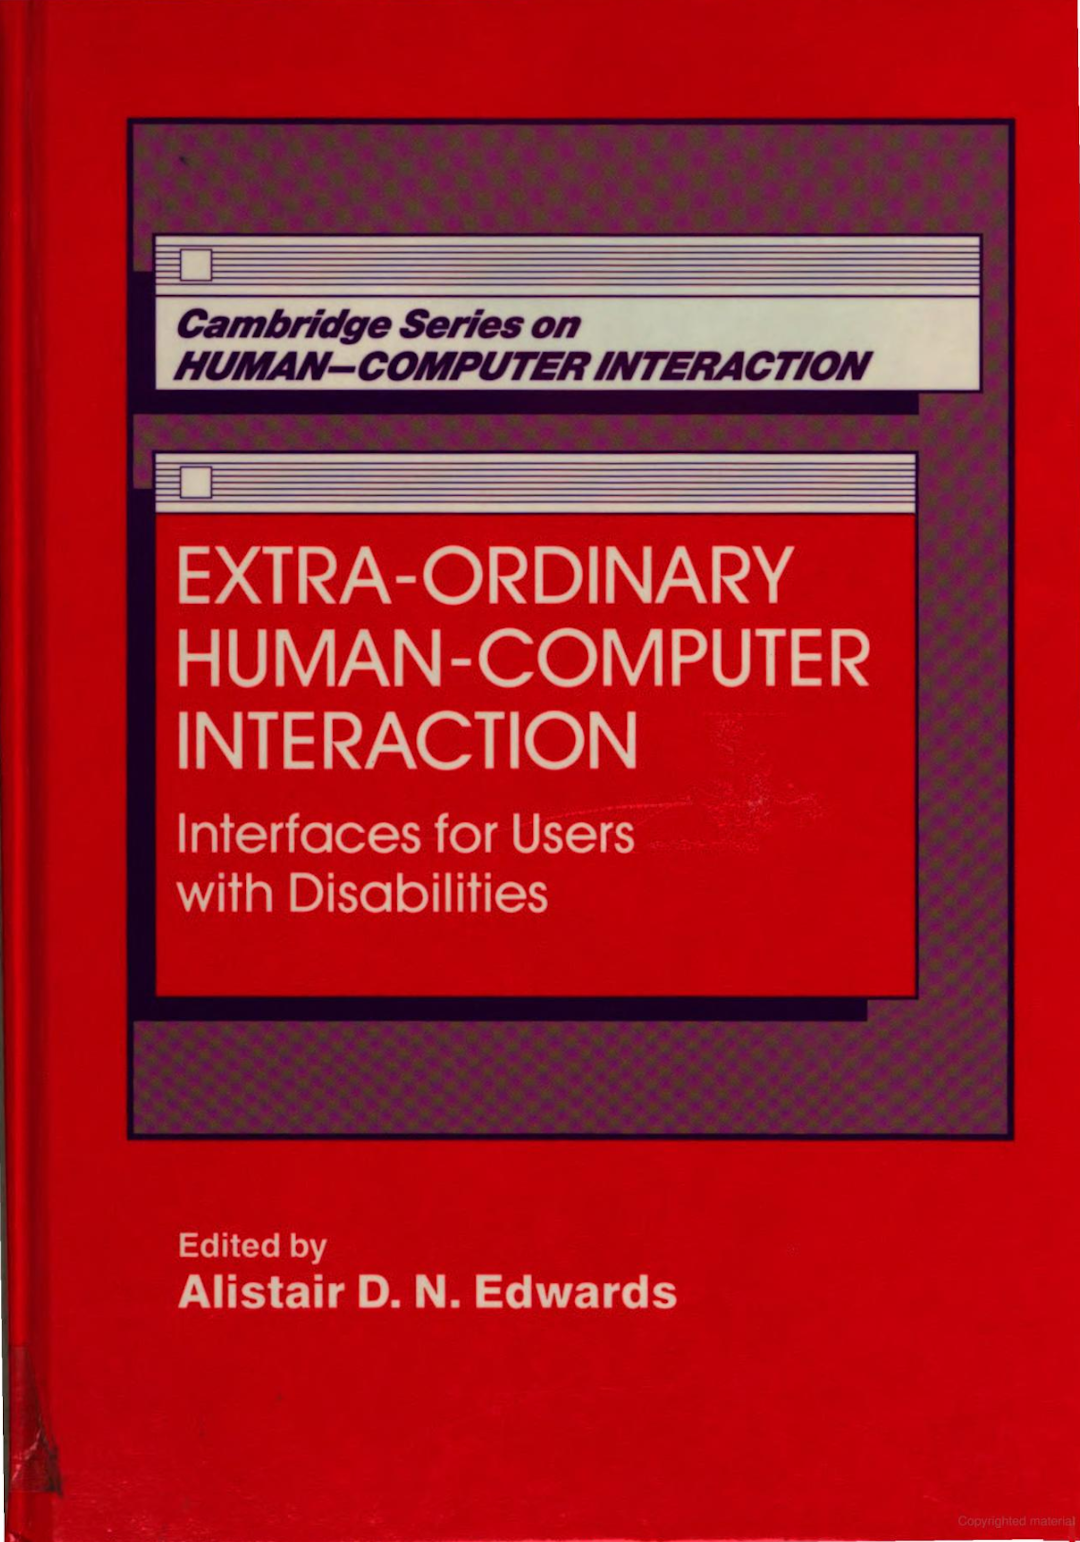 Extra-ordinary Human-Computer Interaction: Interfaces for Users with Disabilities